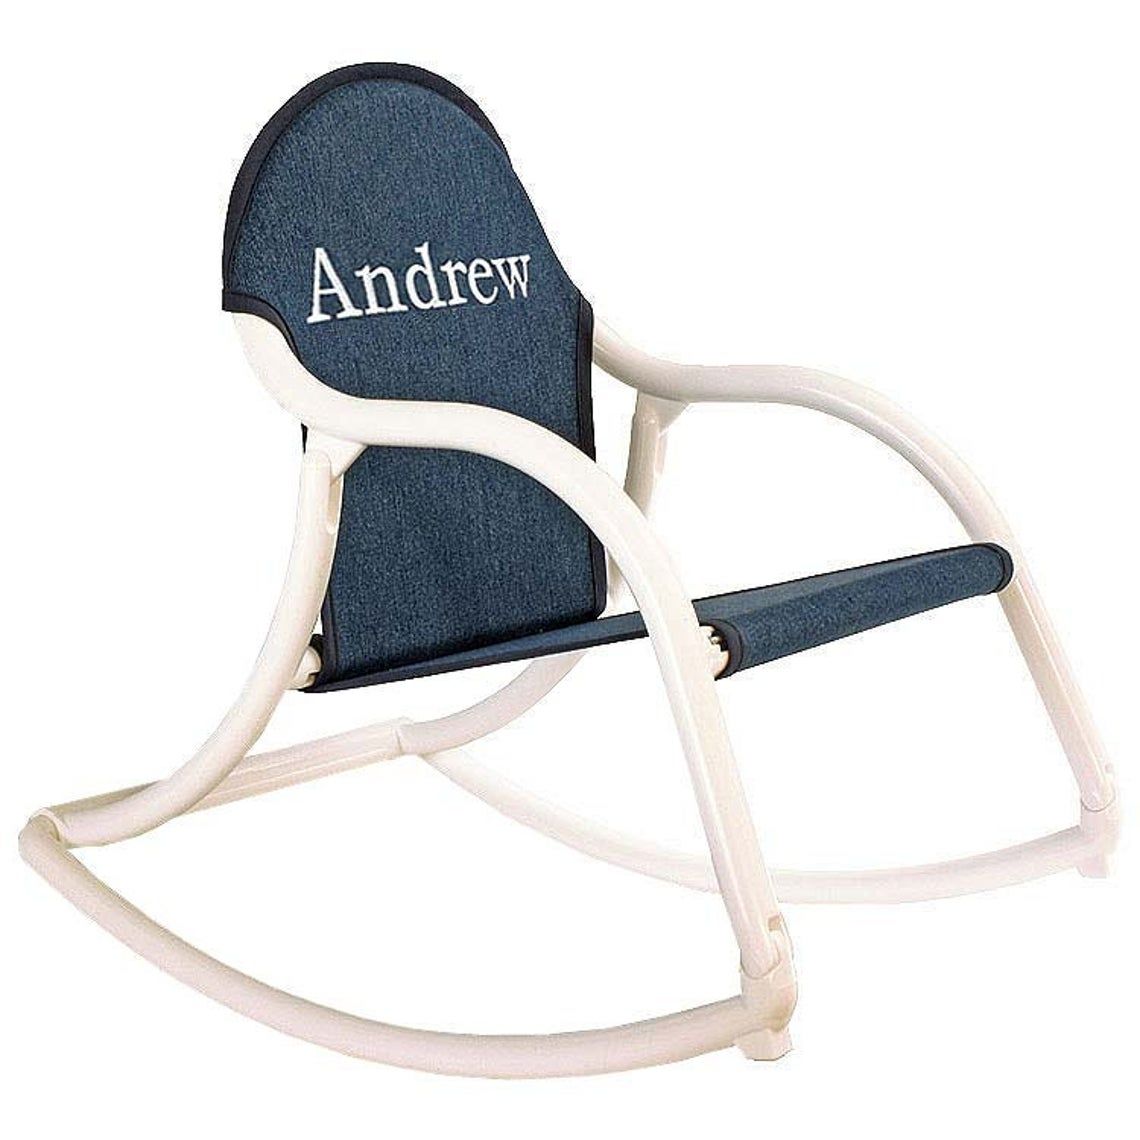 kid-sized rocking chair with denim seat and white arms embroidered with the name Andrew